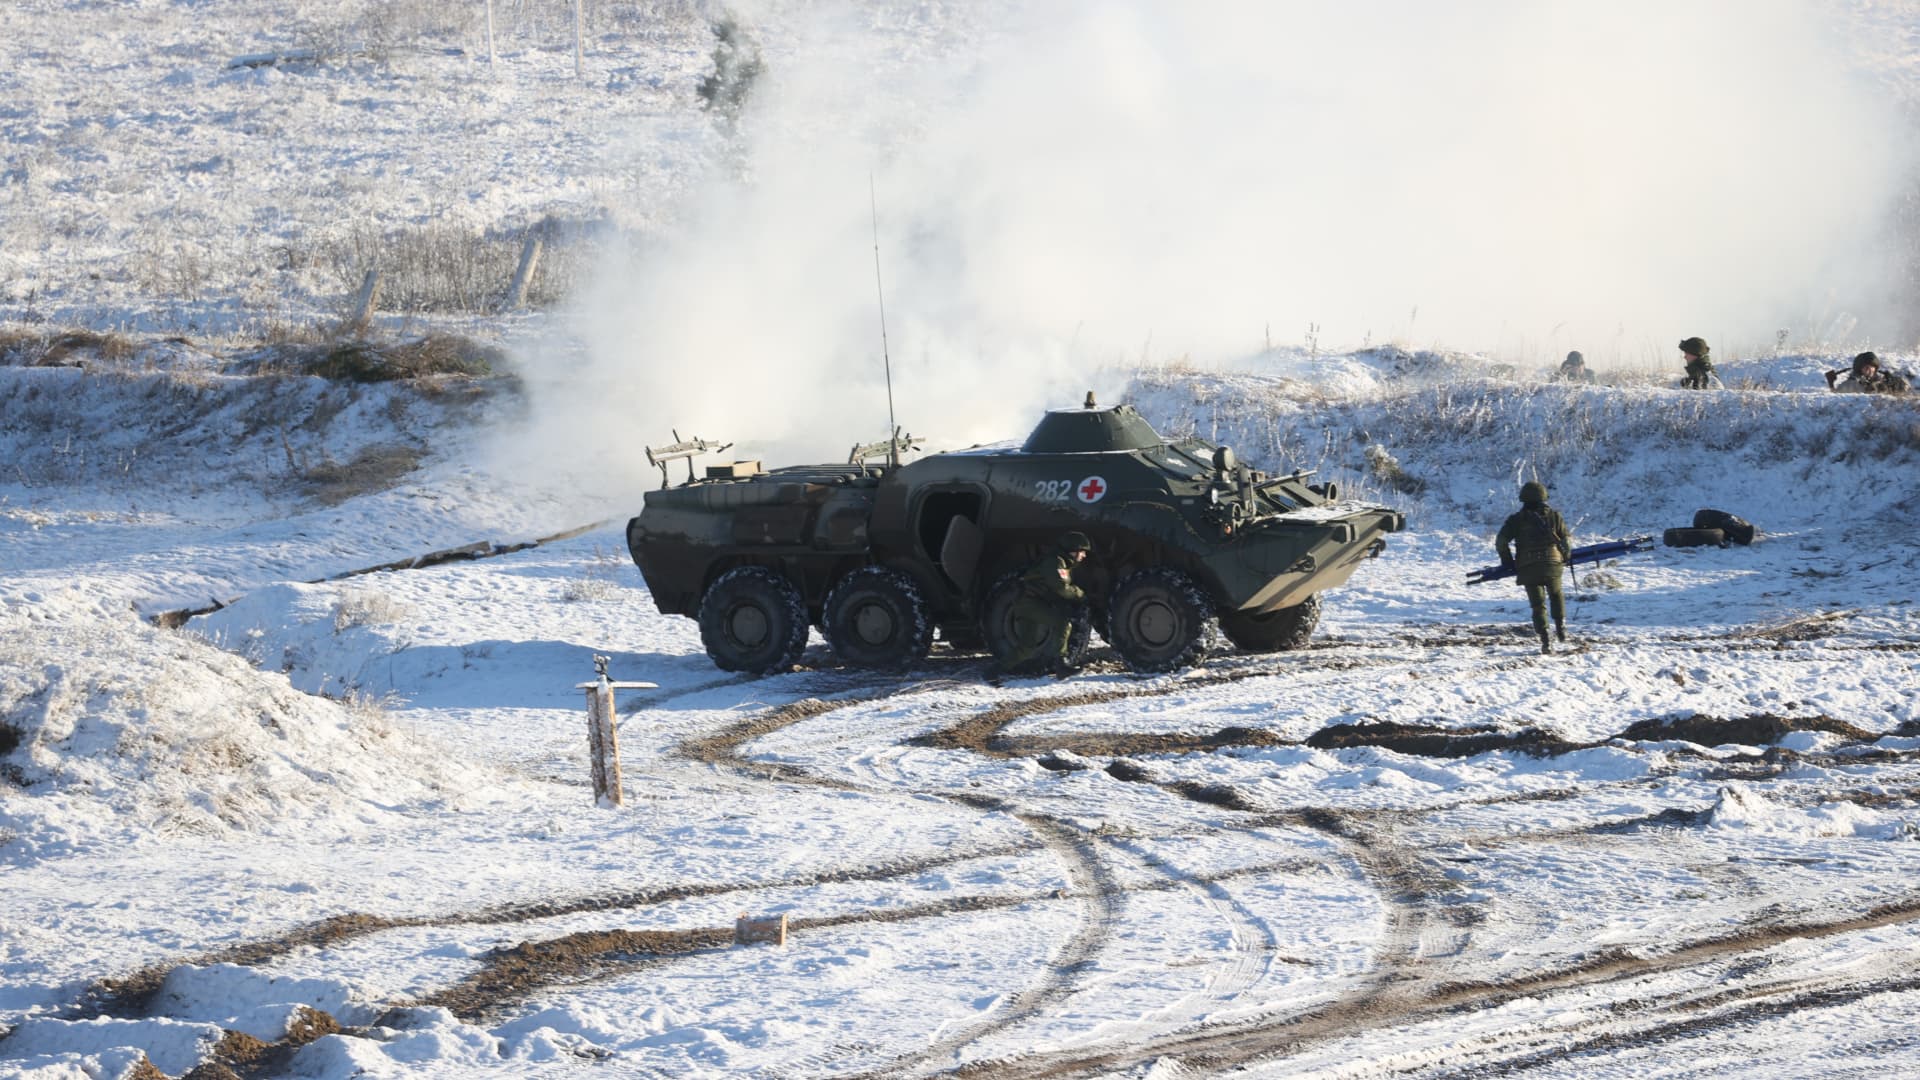 Russian and Belarusian armed forces conduct joint military drills on Feb. 12, 2022. Despite such military exercises ahead of the invasion, military analysts have said the first phase of the war showed a lack of planning, preparedness and tactical skill among Russia's military command and soldiers, many of whom are conscripts.